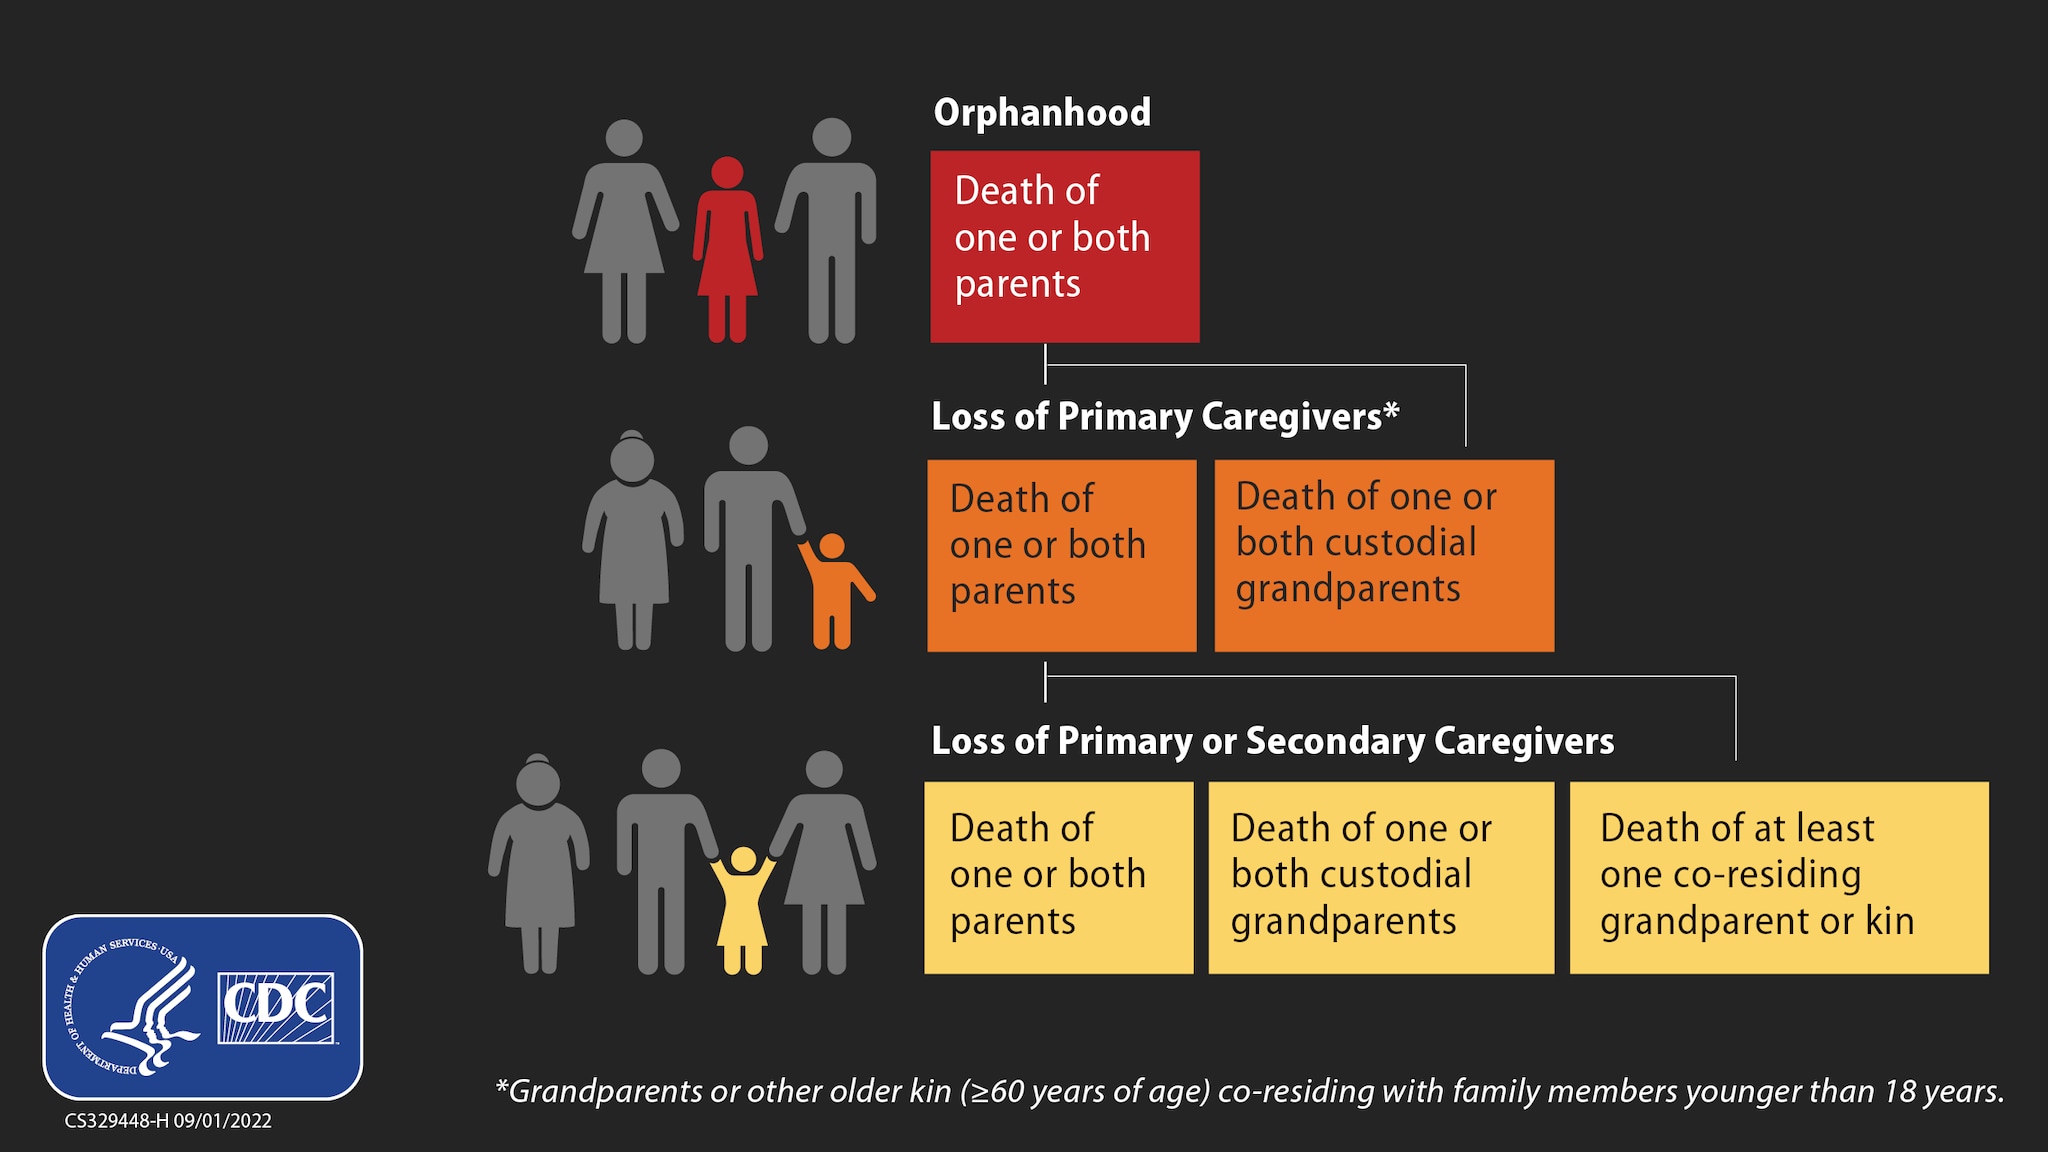 Figure caption: Definitions of orphanhood, loss of primary caregivers, and loss of primary or secondary caregivers.